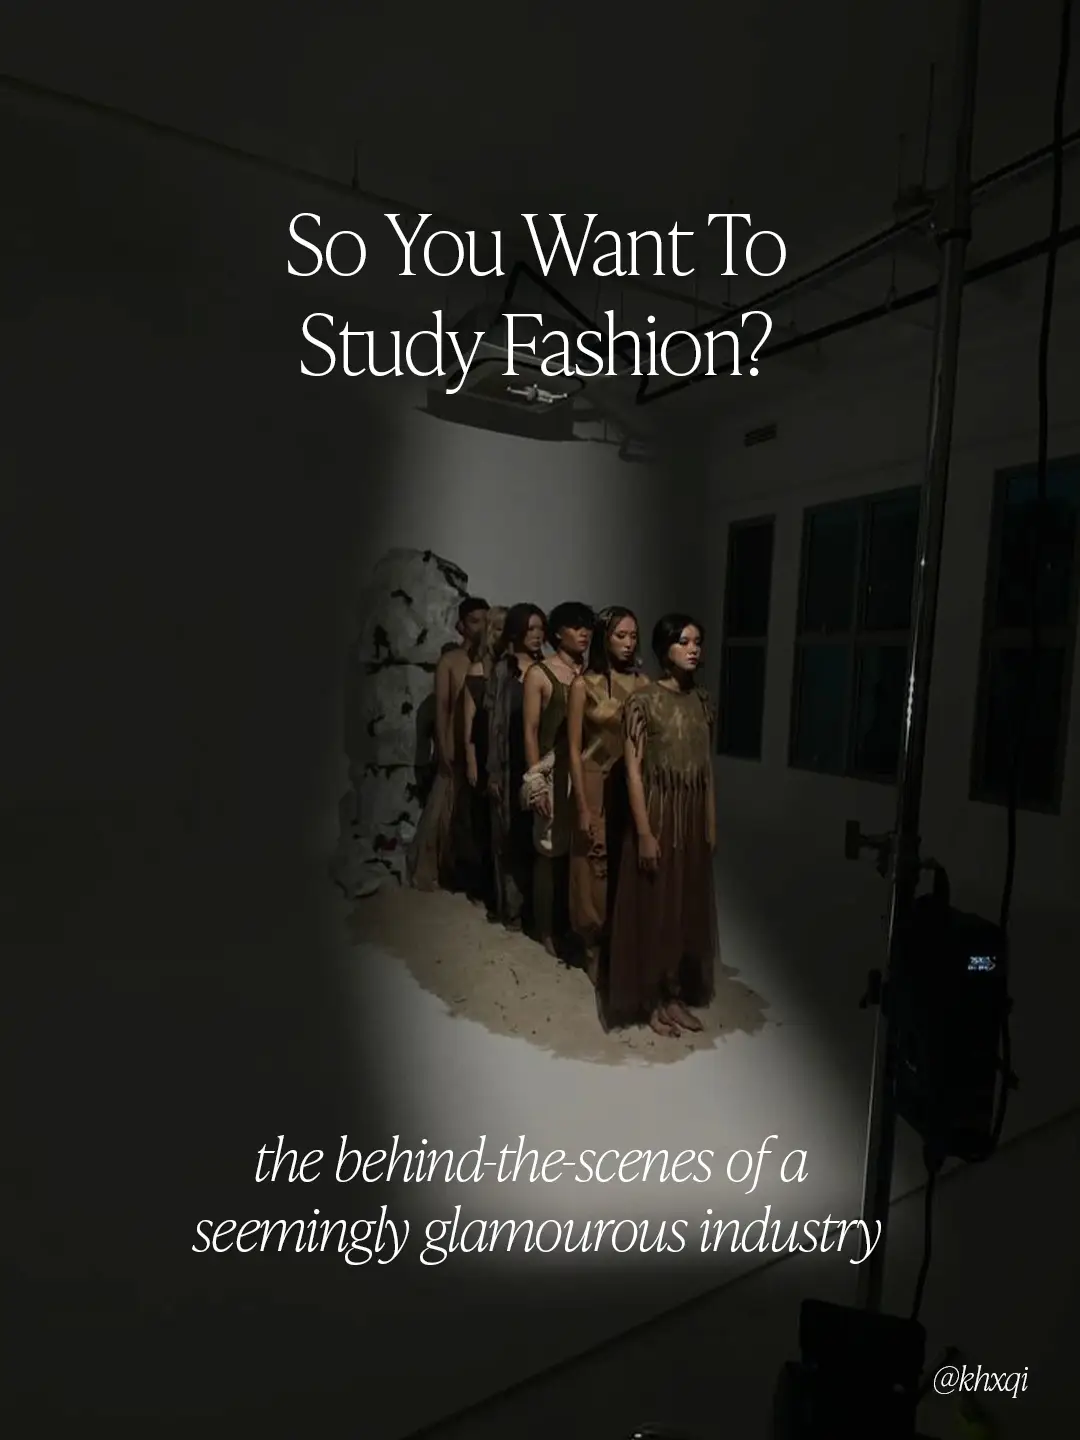 thinking of studying fashion? READ THIS.'s images(0)